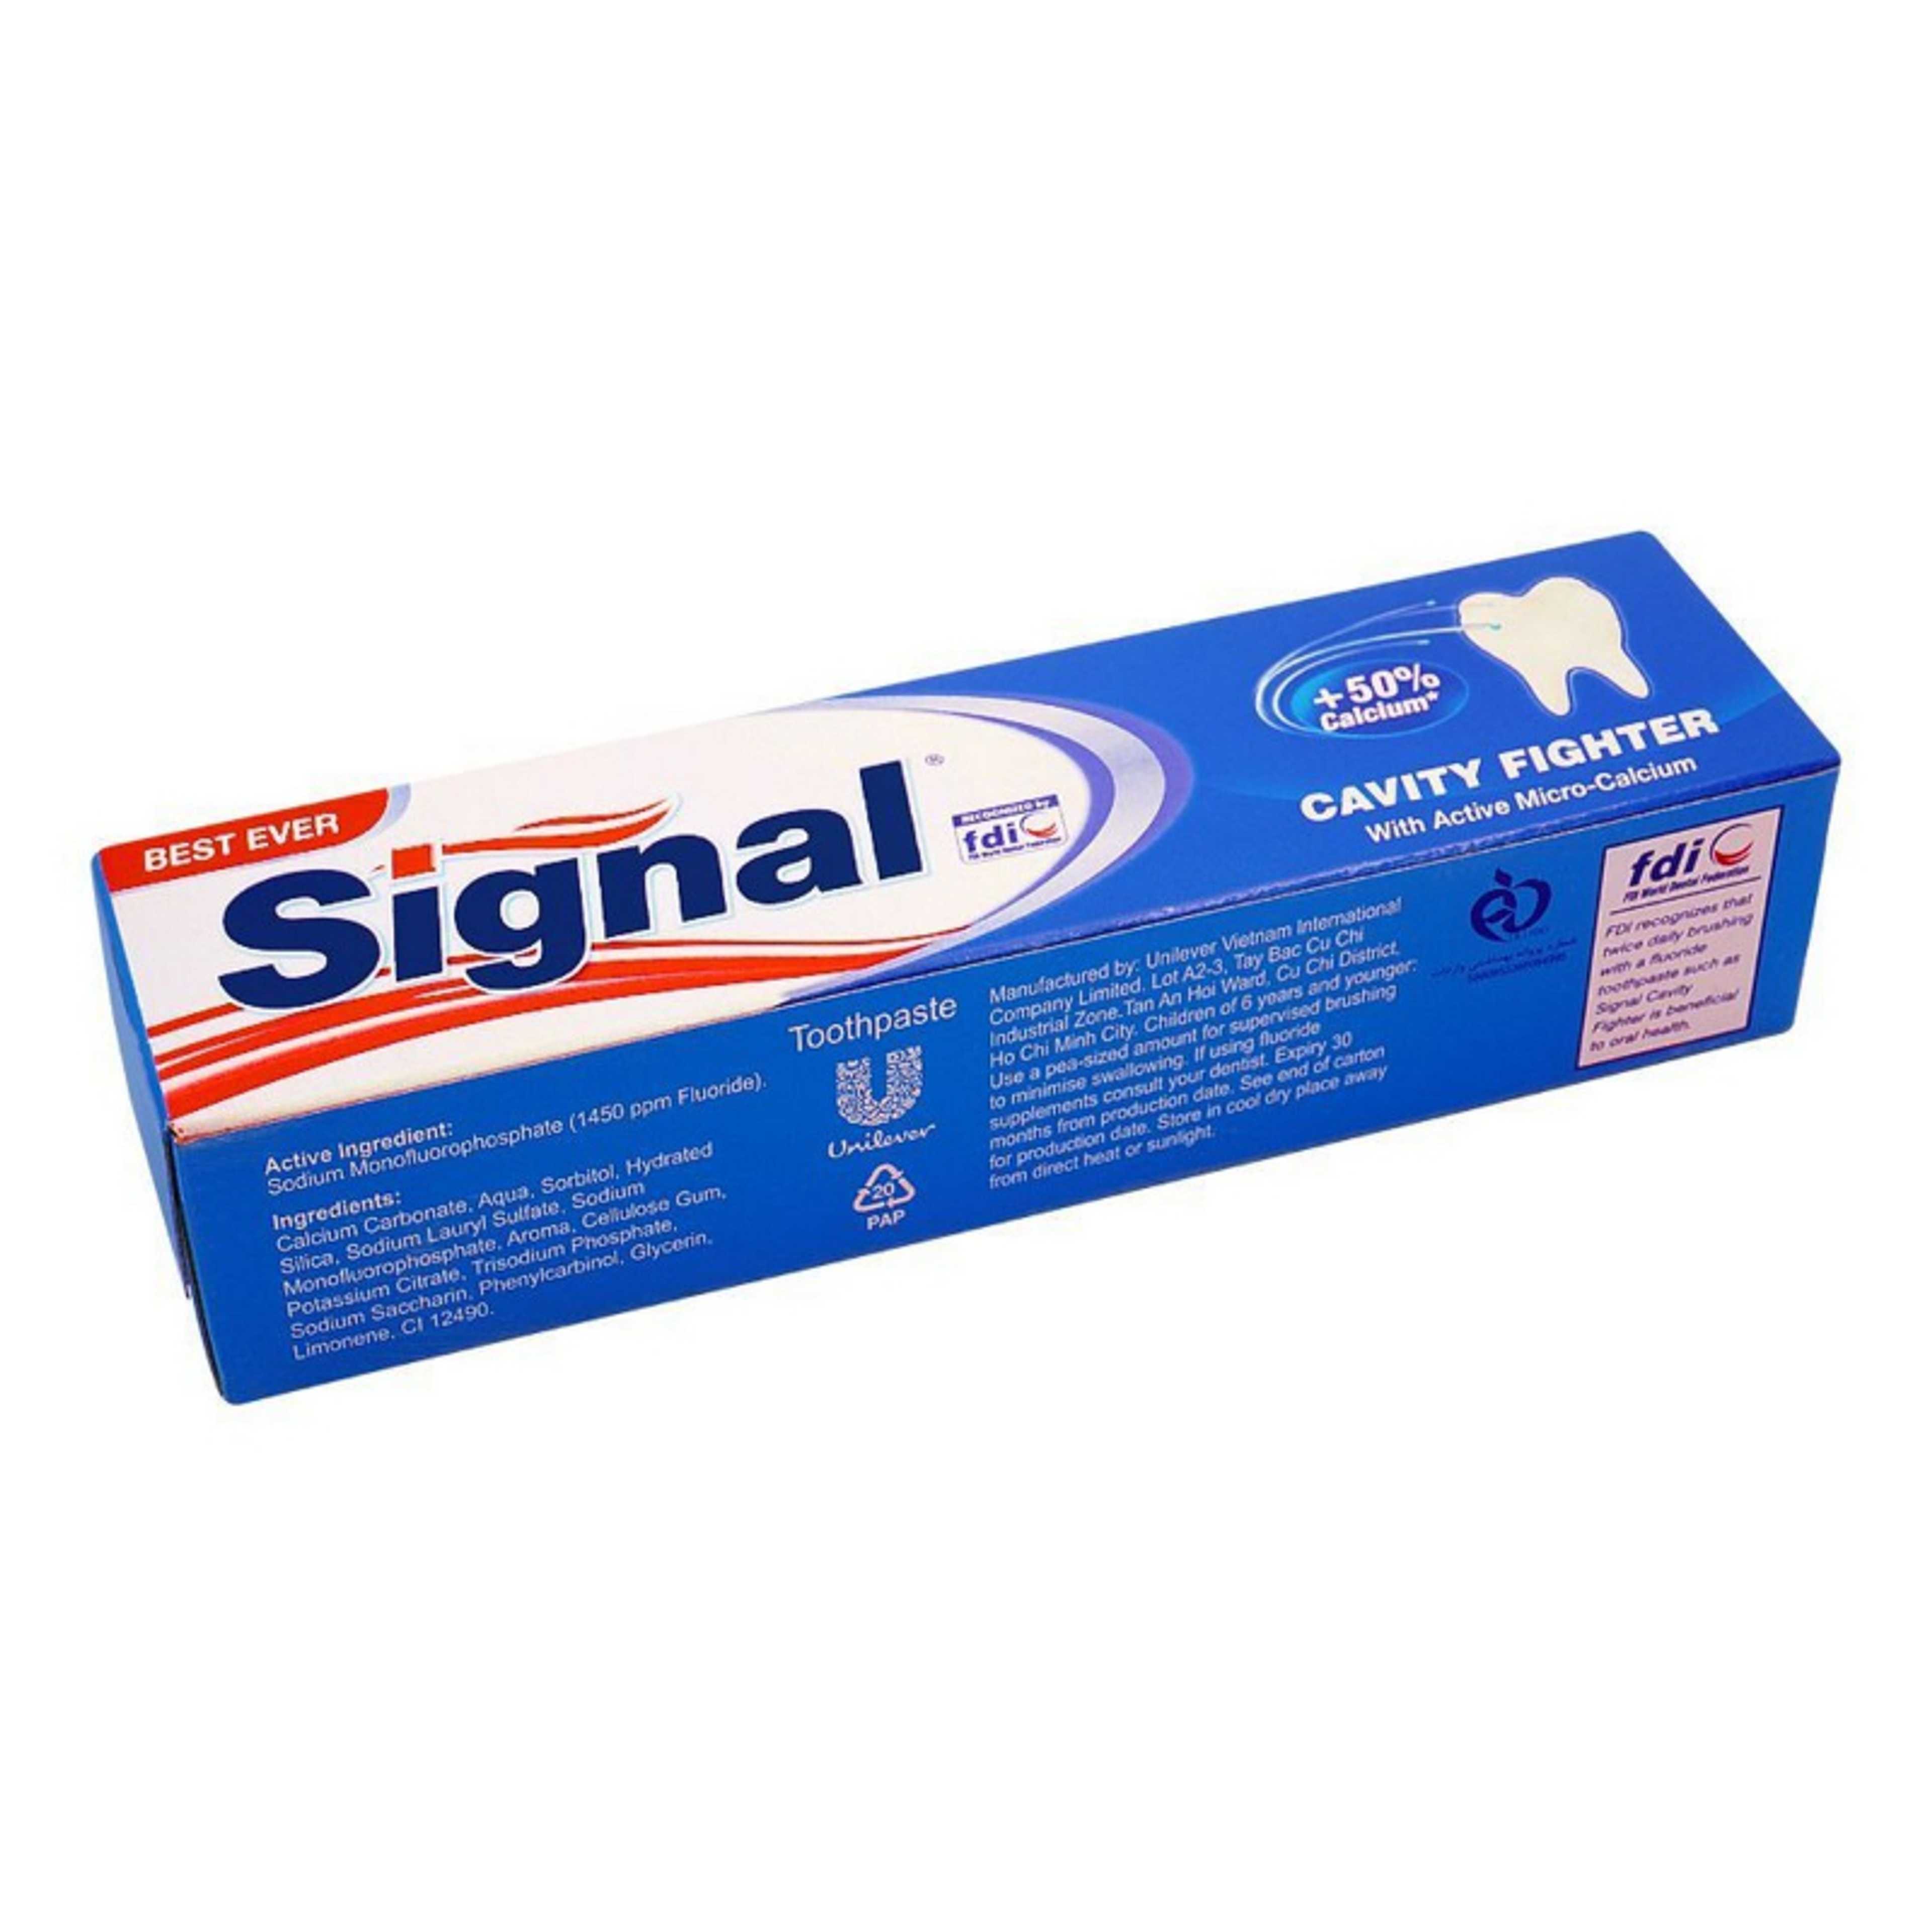 SIGNAL TOOTH PASTE CAVITY FIGHTER 100ML